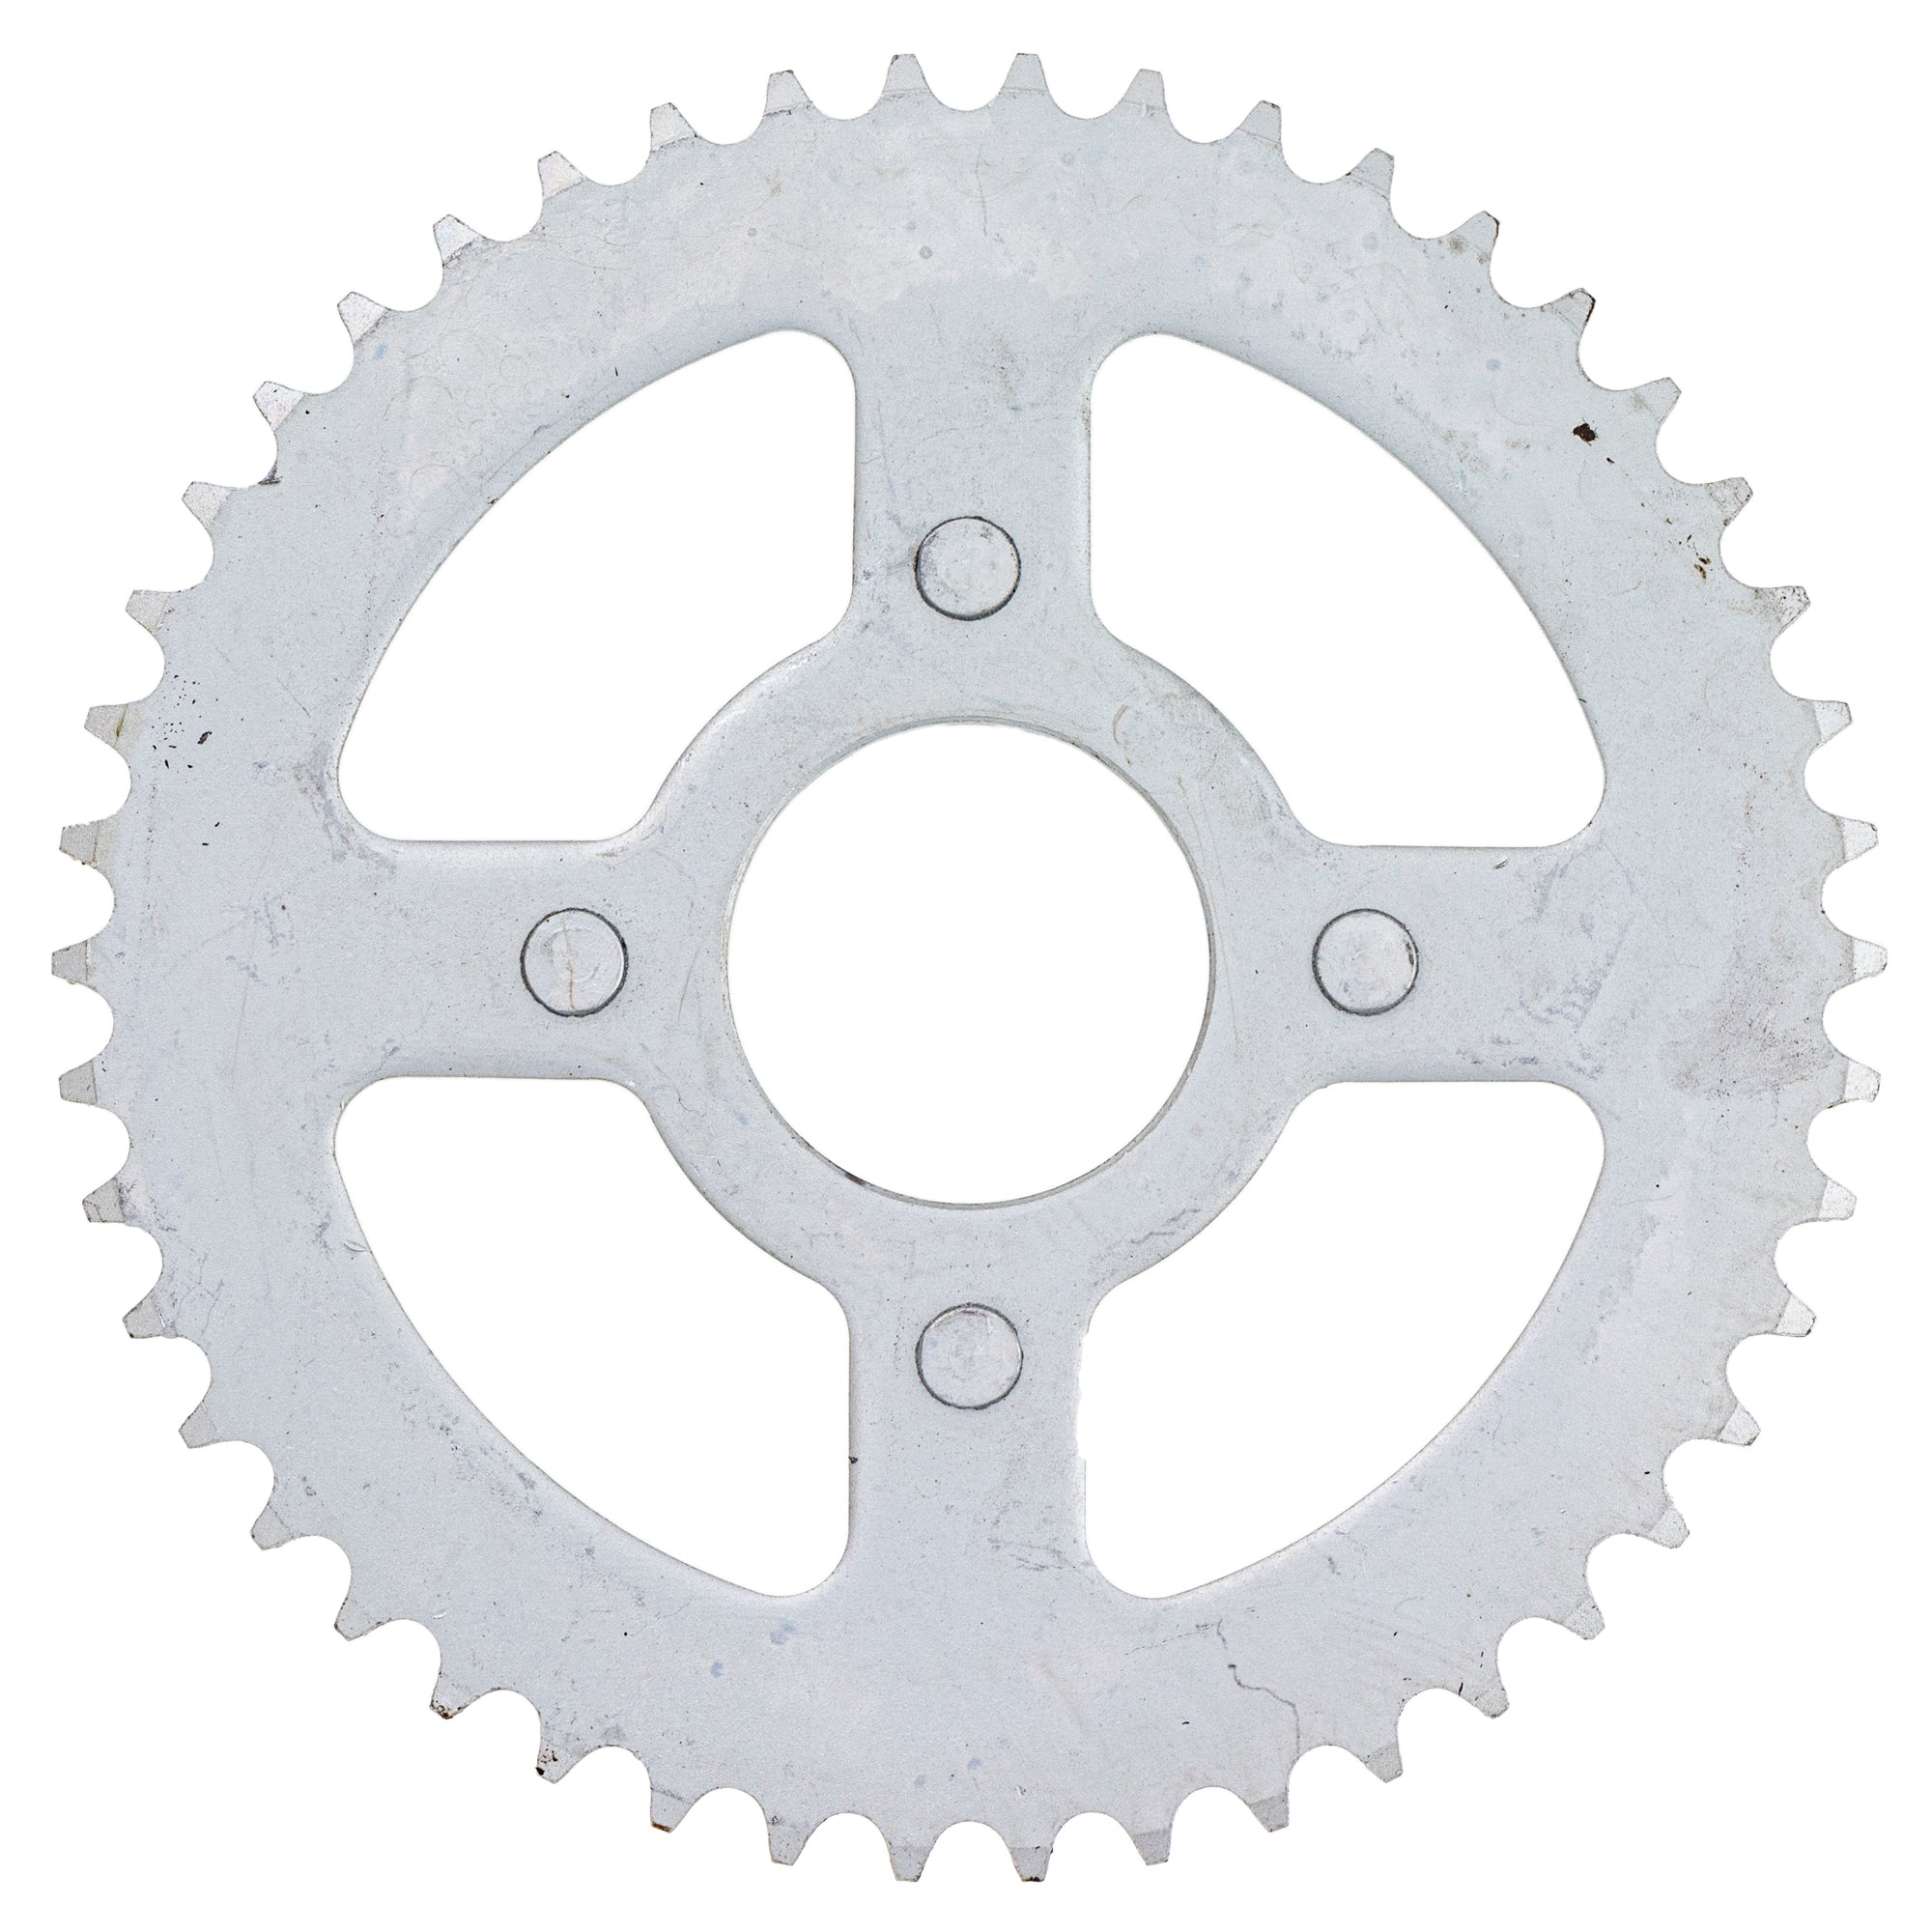 420 Pitch Front 14T Rear 46T Drive Sprocket Kit for Honda XR80 XR75